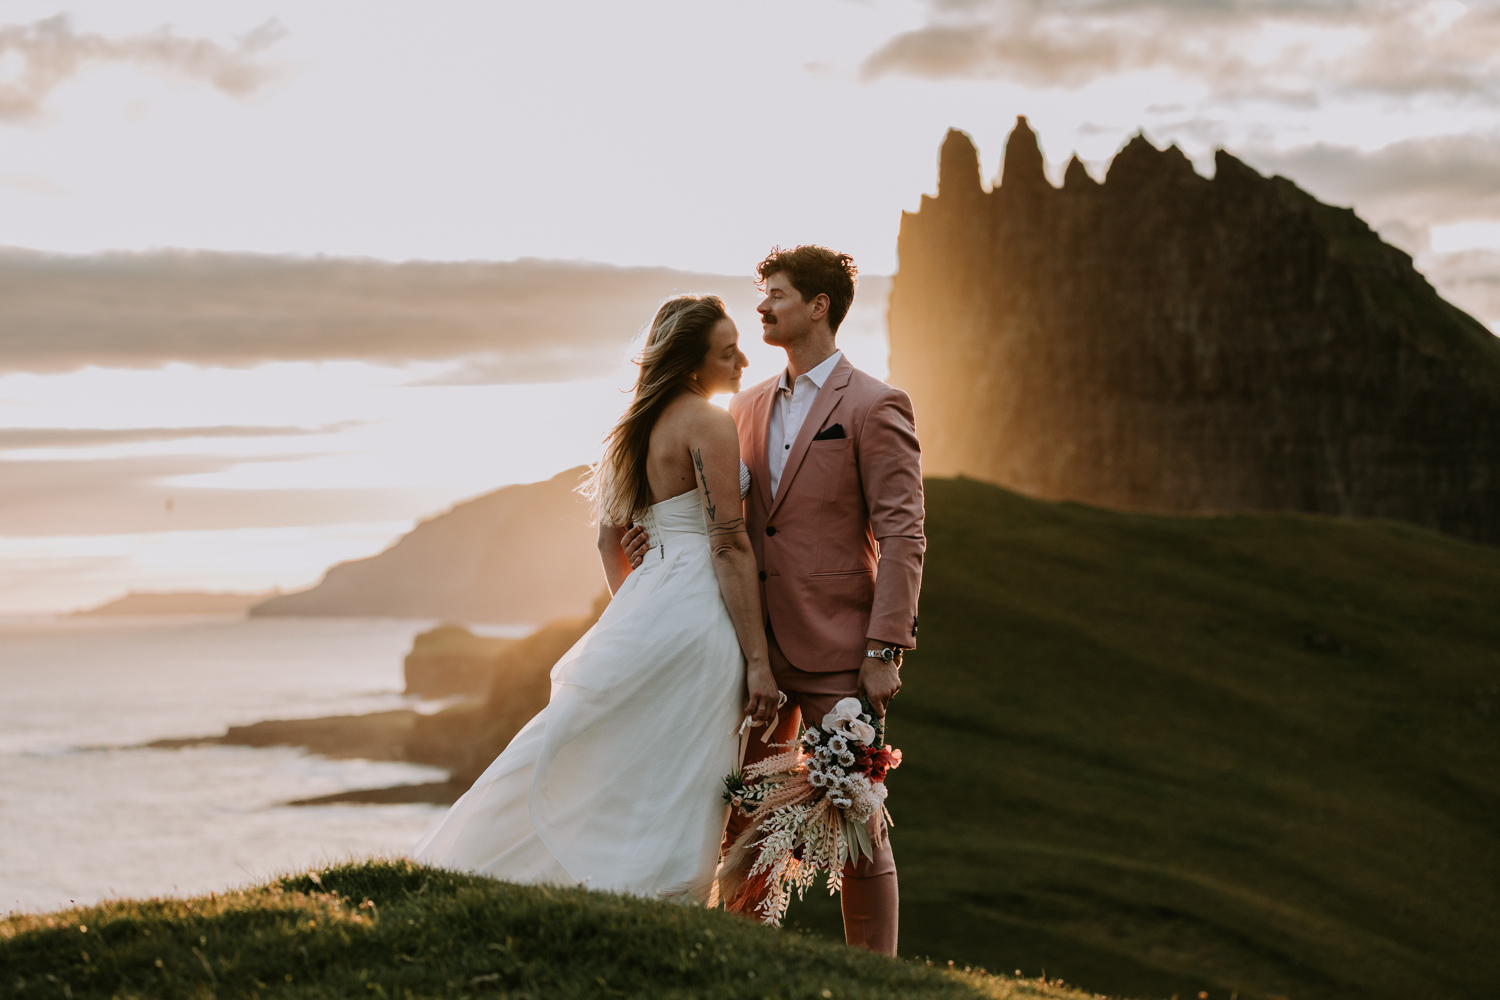 A hetero couple in white wedding dress and pink suit hug against a dramatic, golden sunset with the jagged peaks of the Faroe Islands behind them.